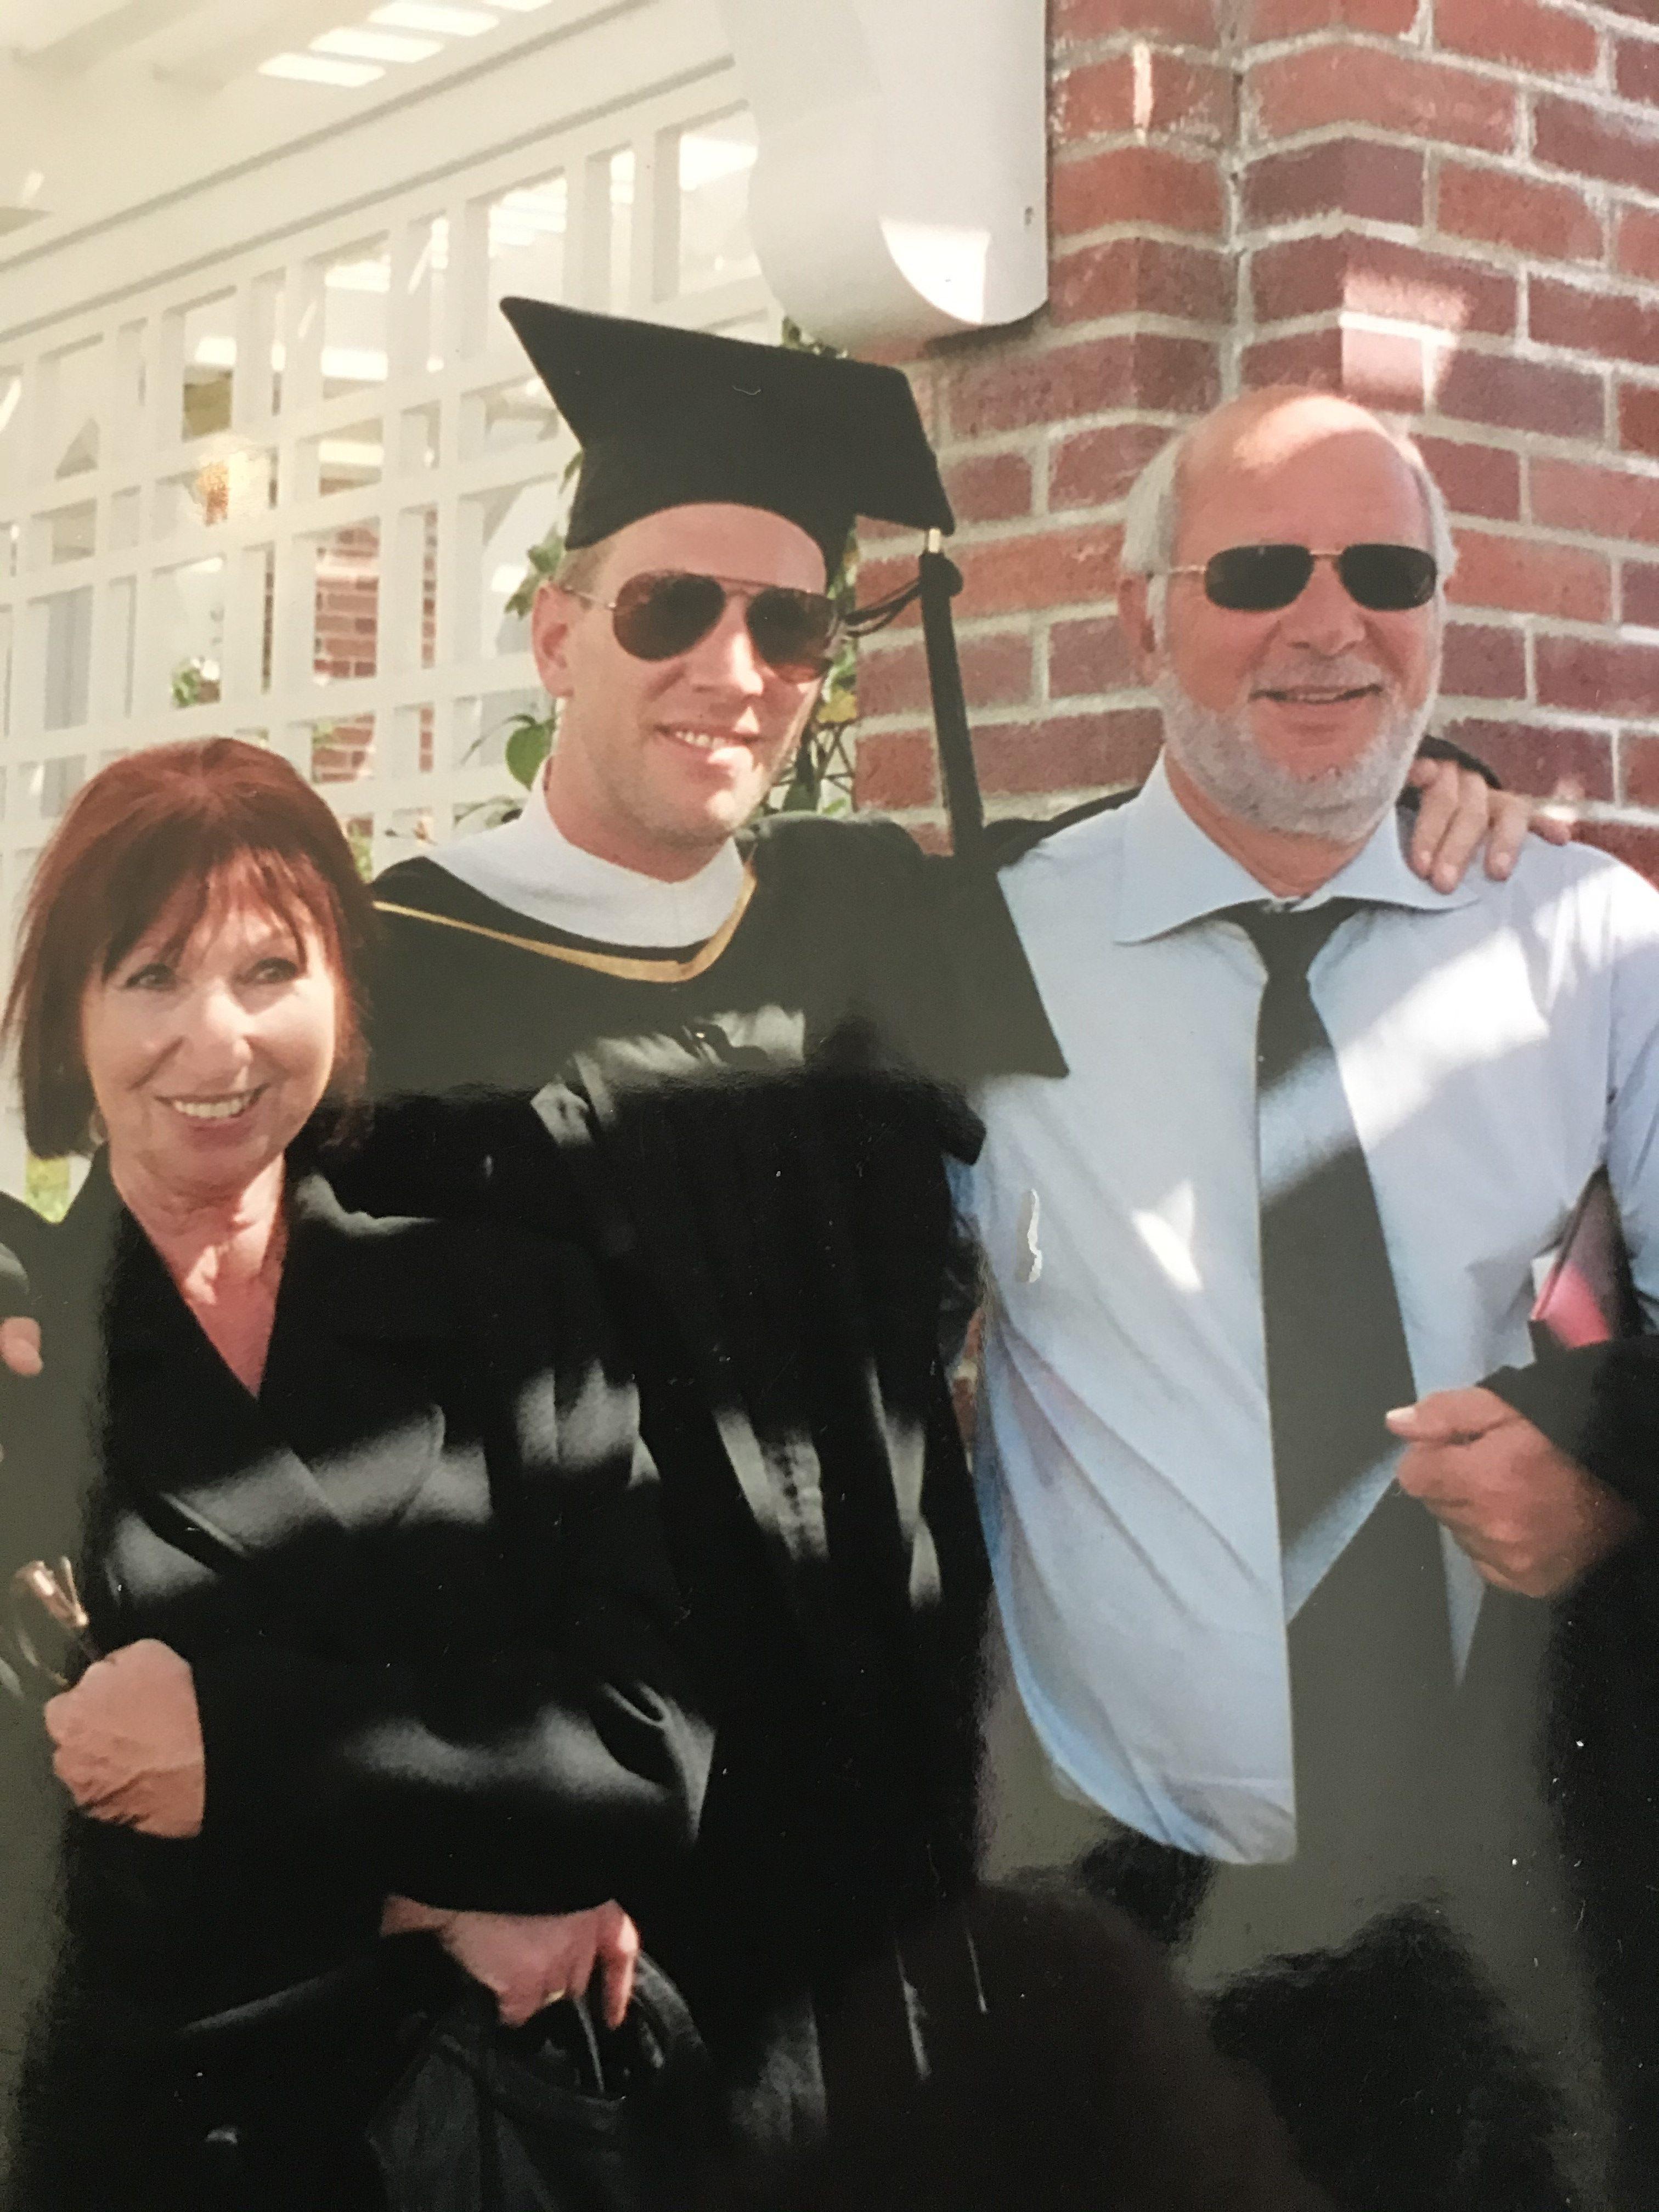 Tim with his parents, Edith and Volker Leberecht, at his graduation from USC Los Angeles in 2004